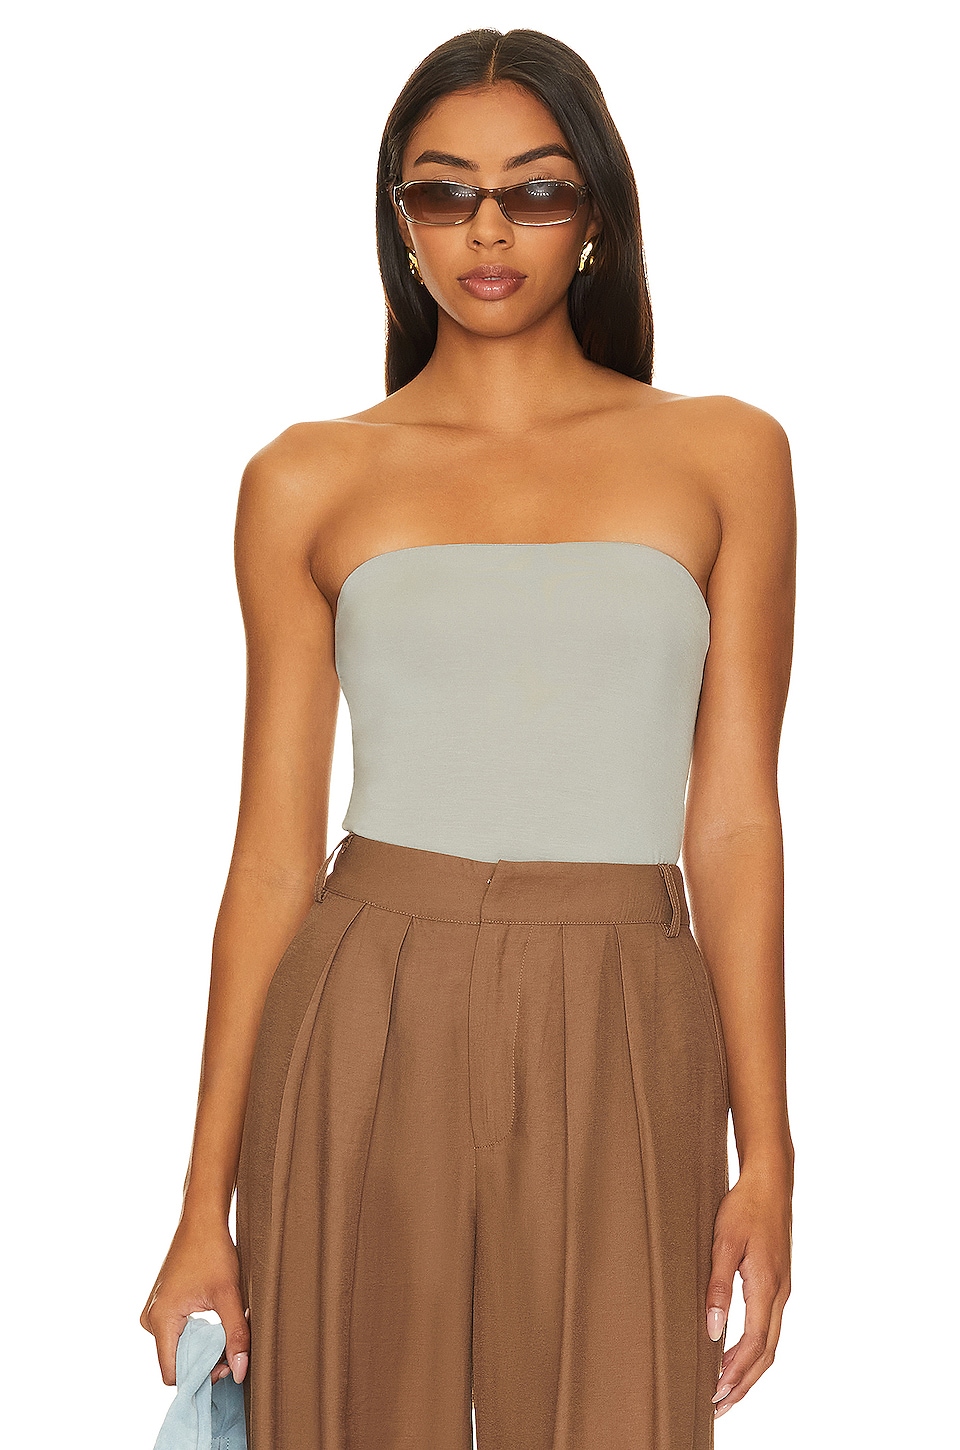 SHE'S ALL THAT STRAPLESS TOP - ONYX – LIONESS FASHION USA